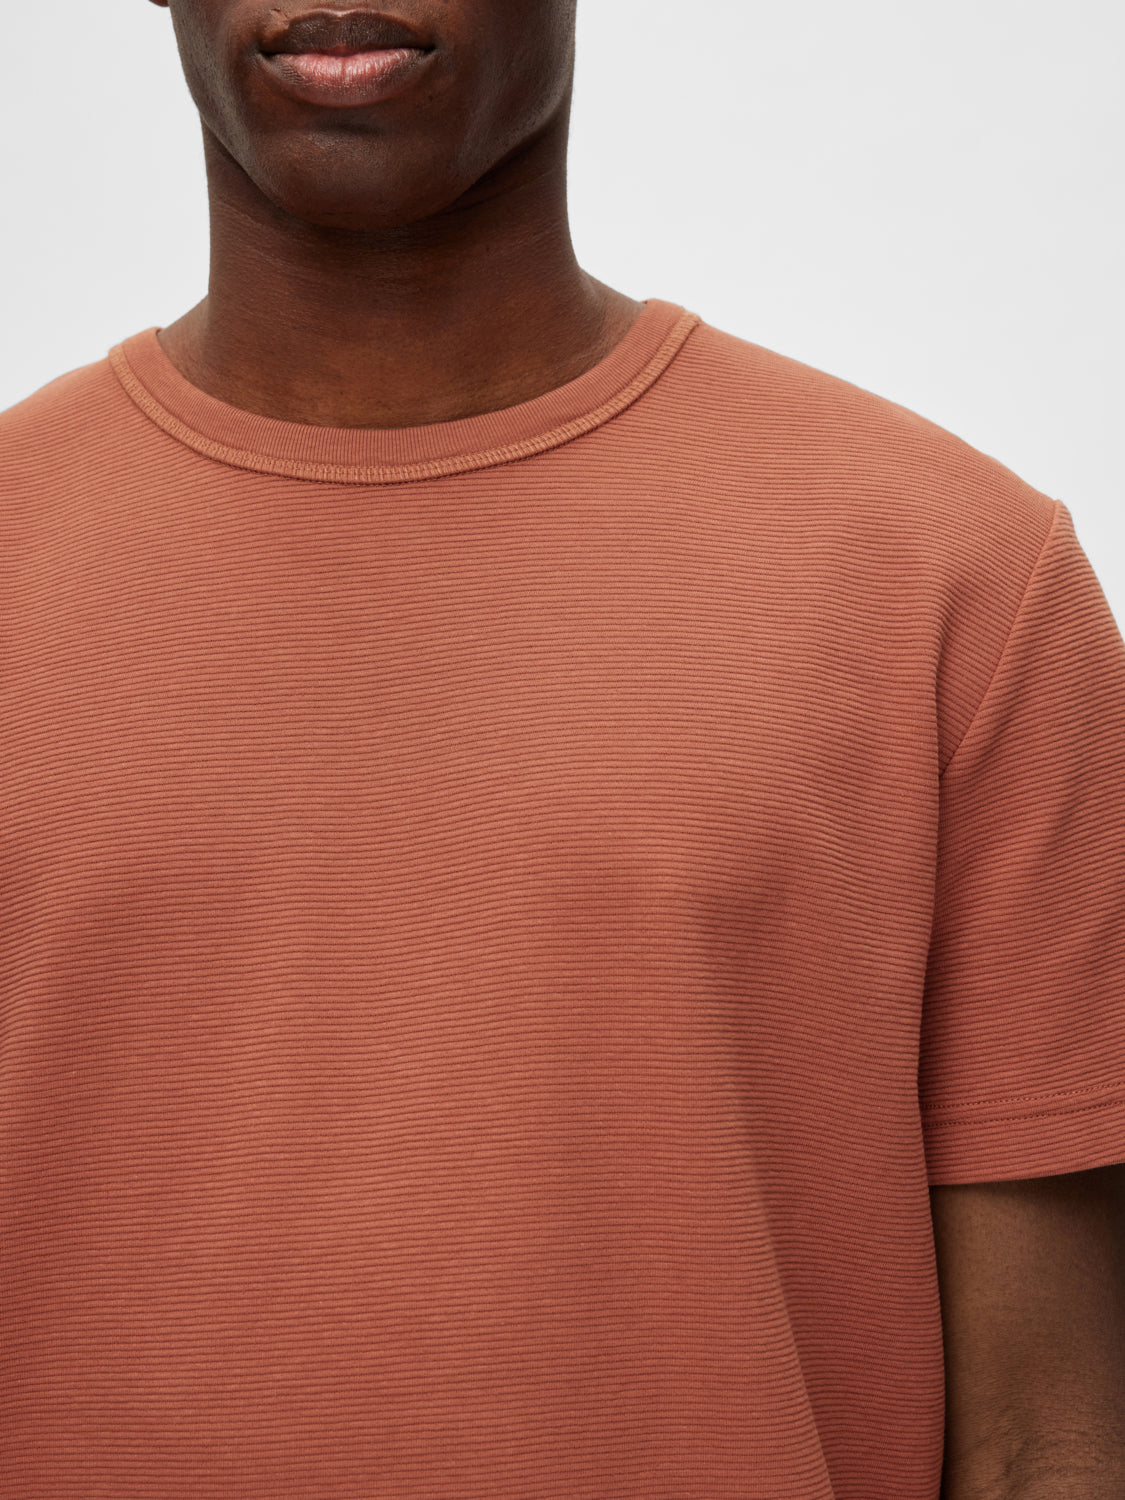 SELECTED HOMME - RELAXCAMP T-Shirt - Baked Clay